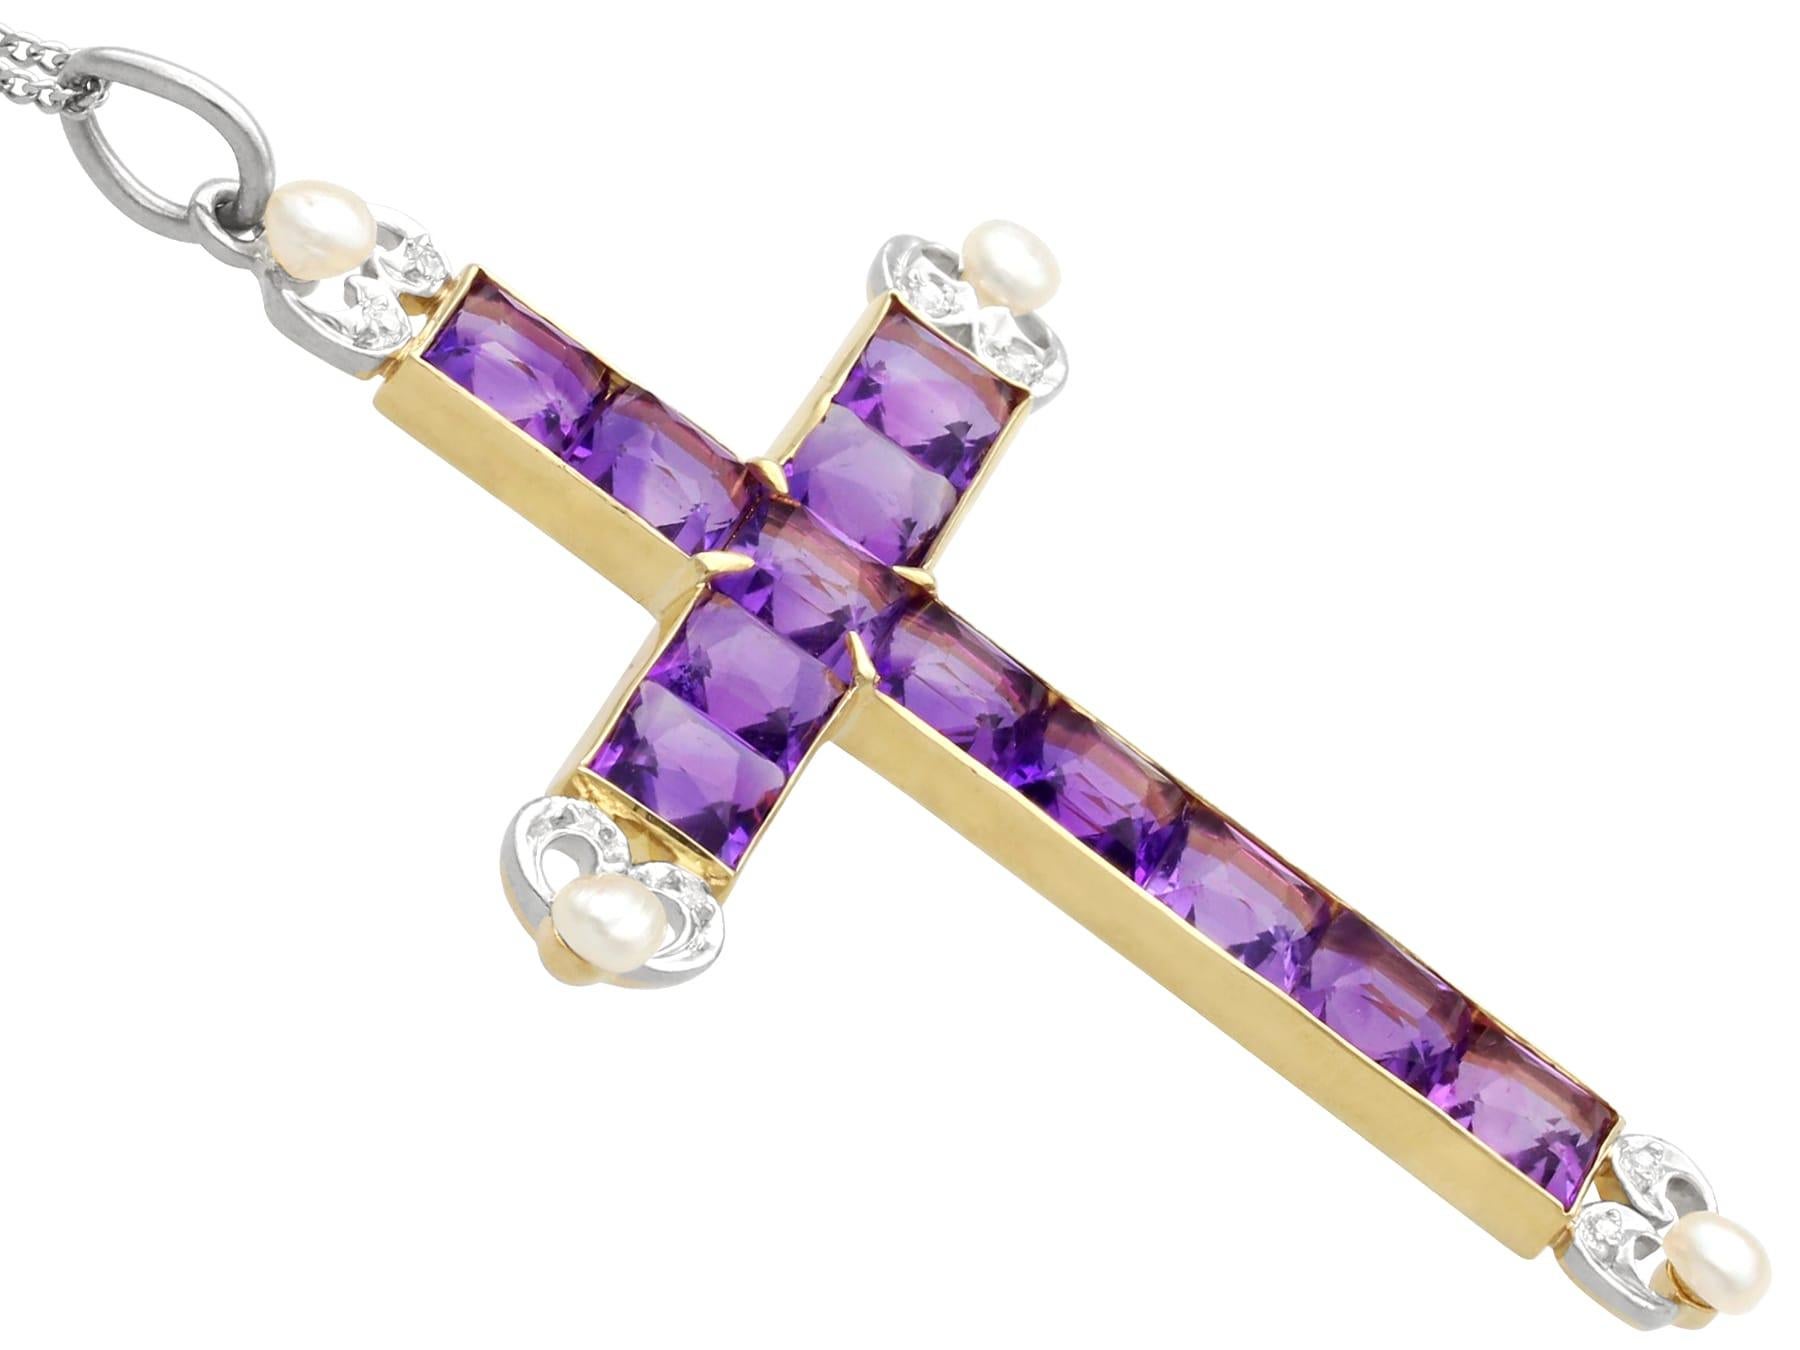 Old European Cut Antique 6 Carat Amethyst, Pearl and 18k Yellow Gold Cross Pendant Circa 1880 For Sale